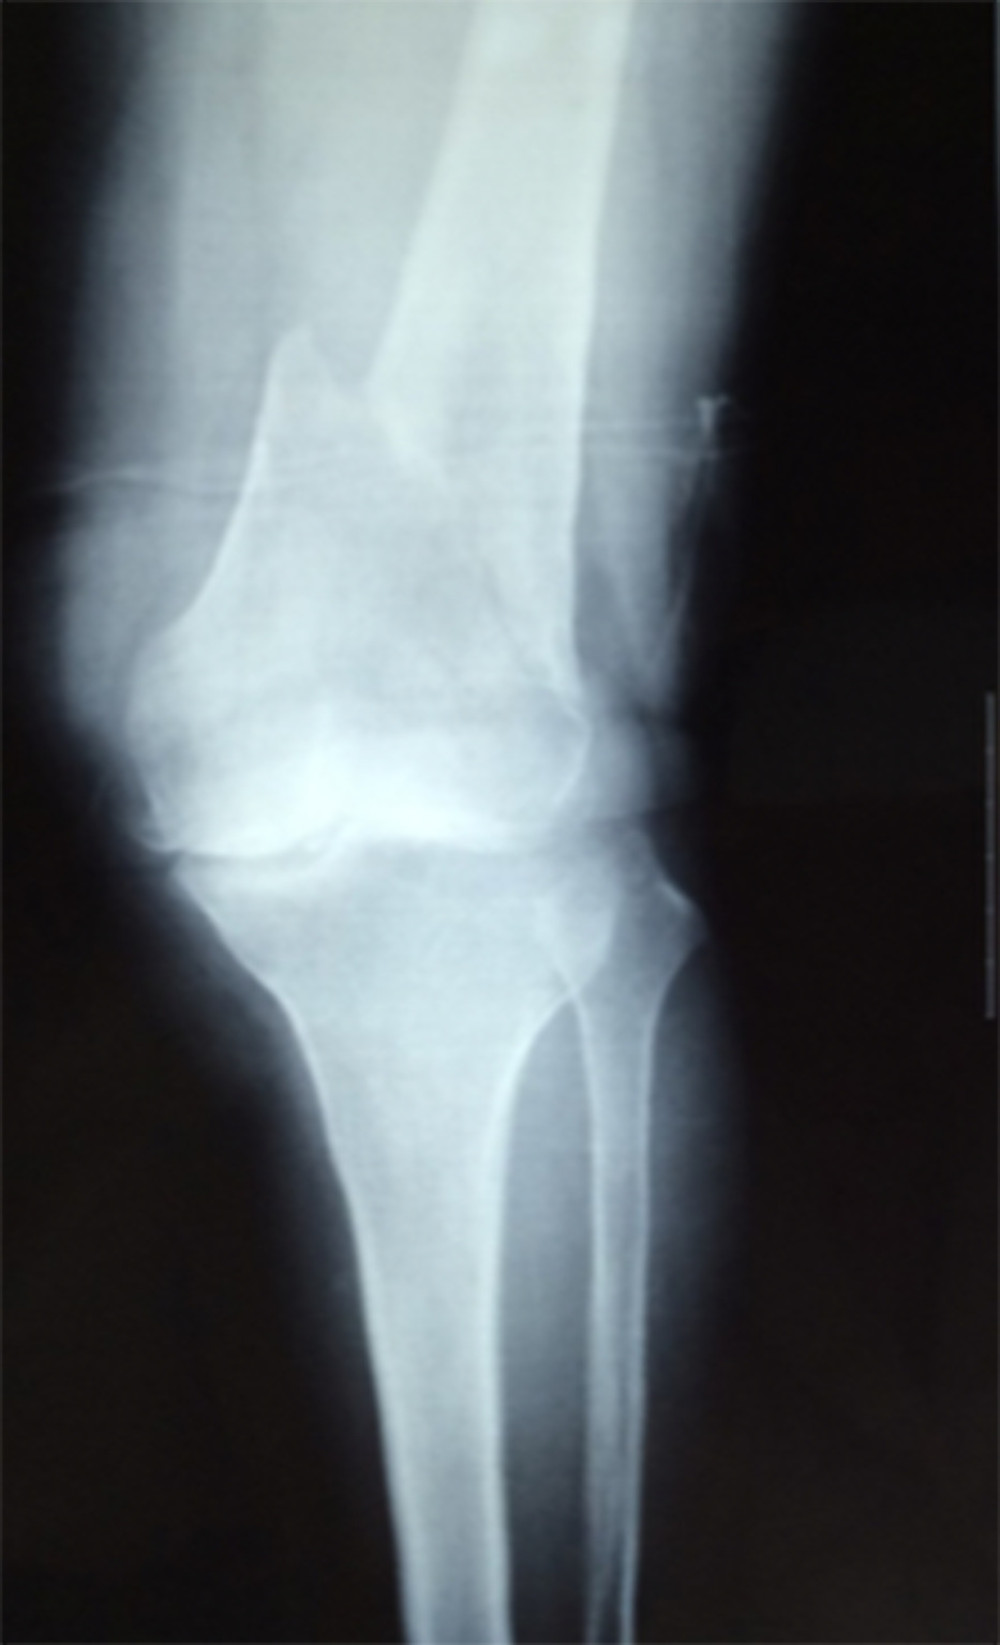 X-ray taken at 74 years old showing the fresh fracture.